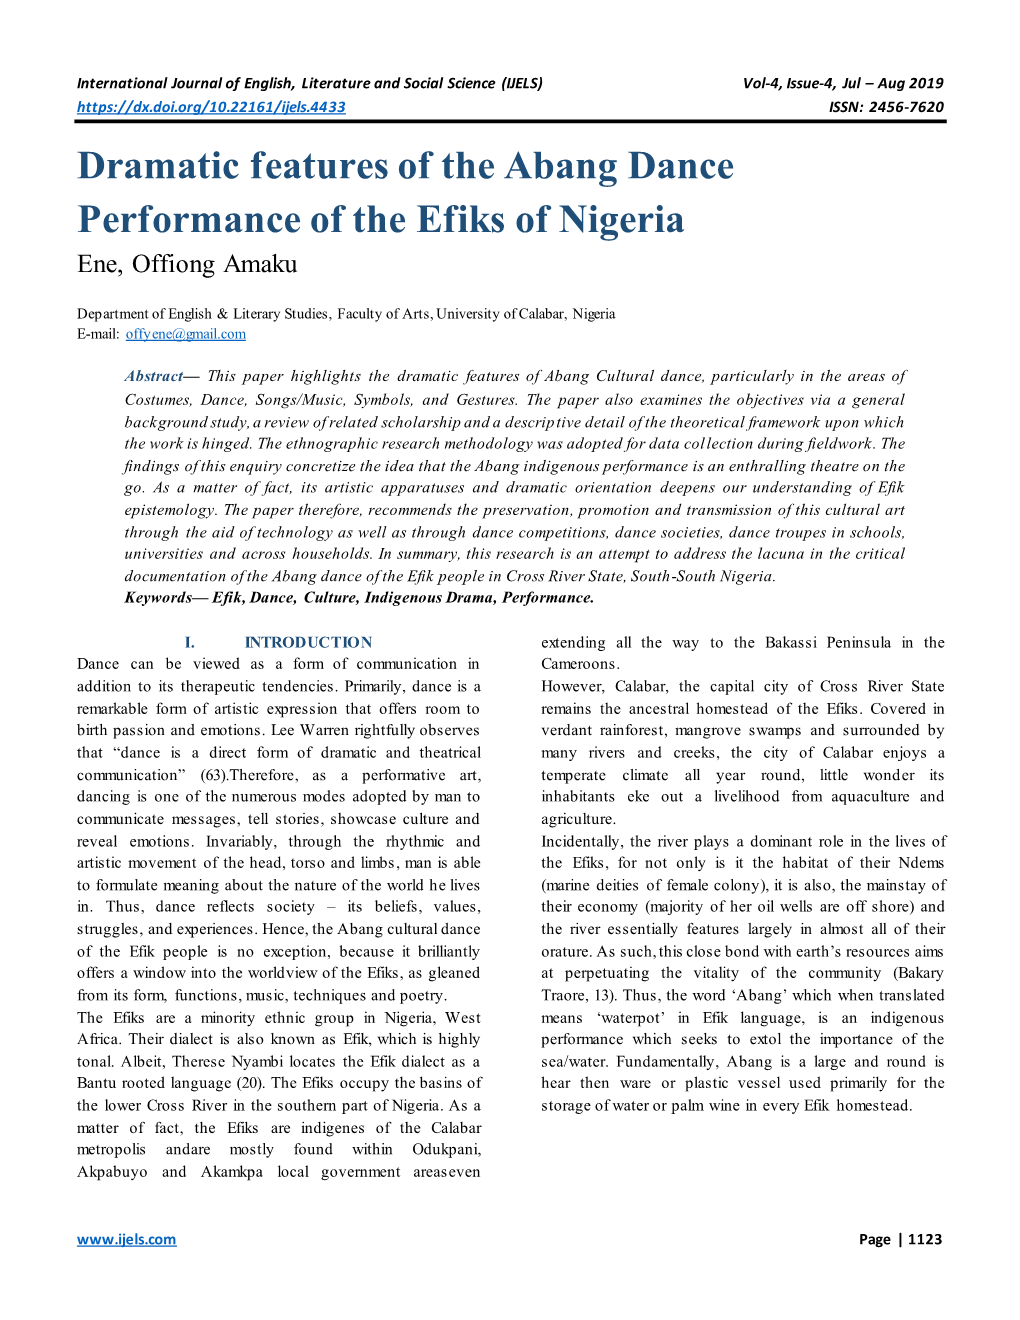 Dramatic Features of the Abang Dance Performance of the Efiks of Nigeria Ene, Offiong Amaku